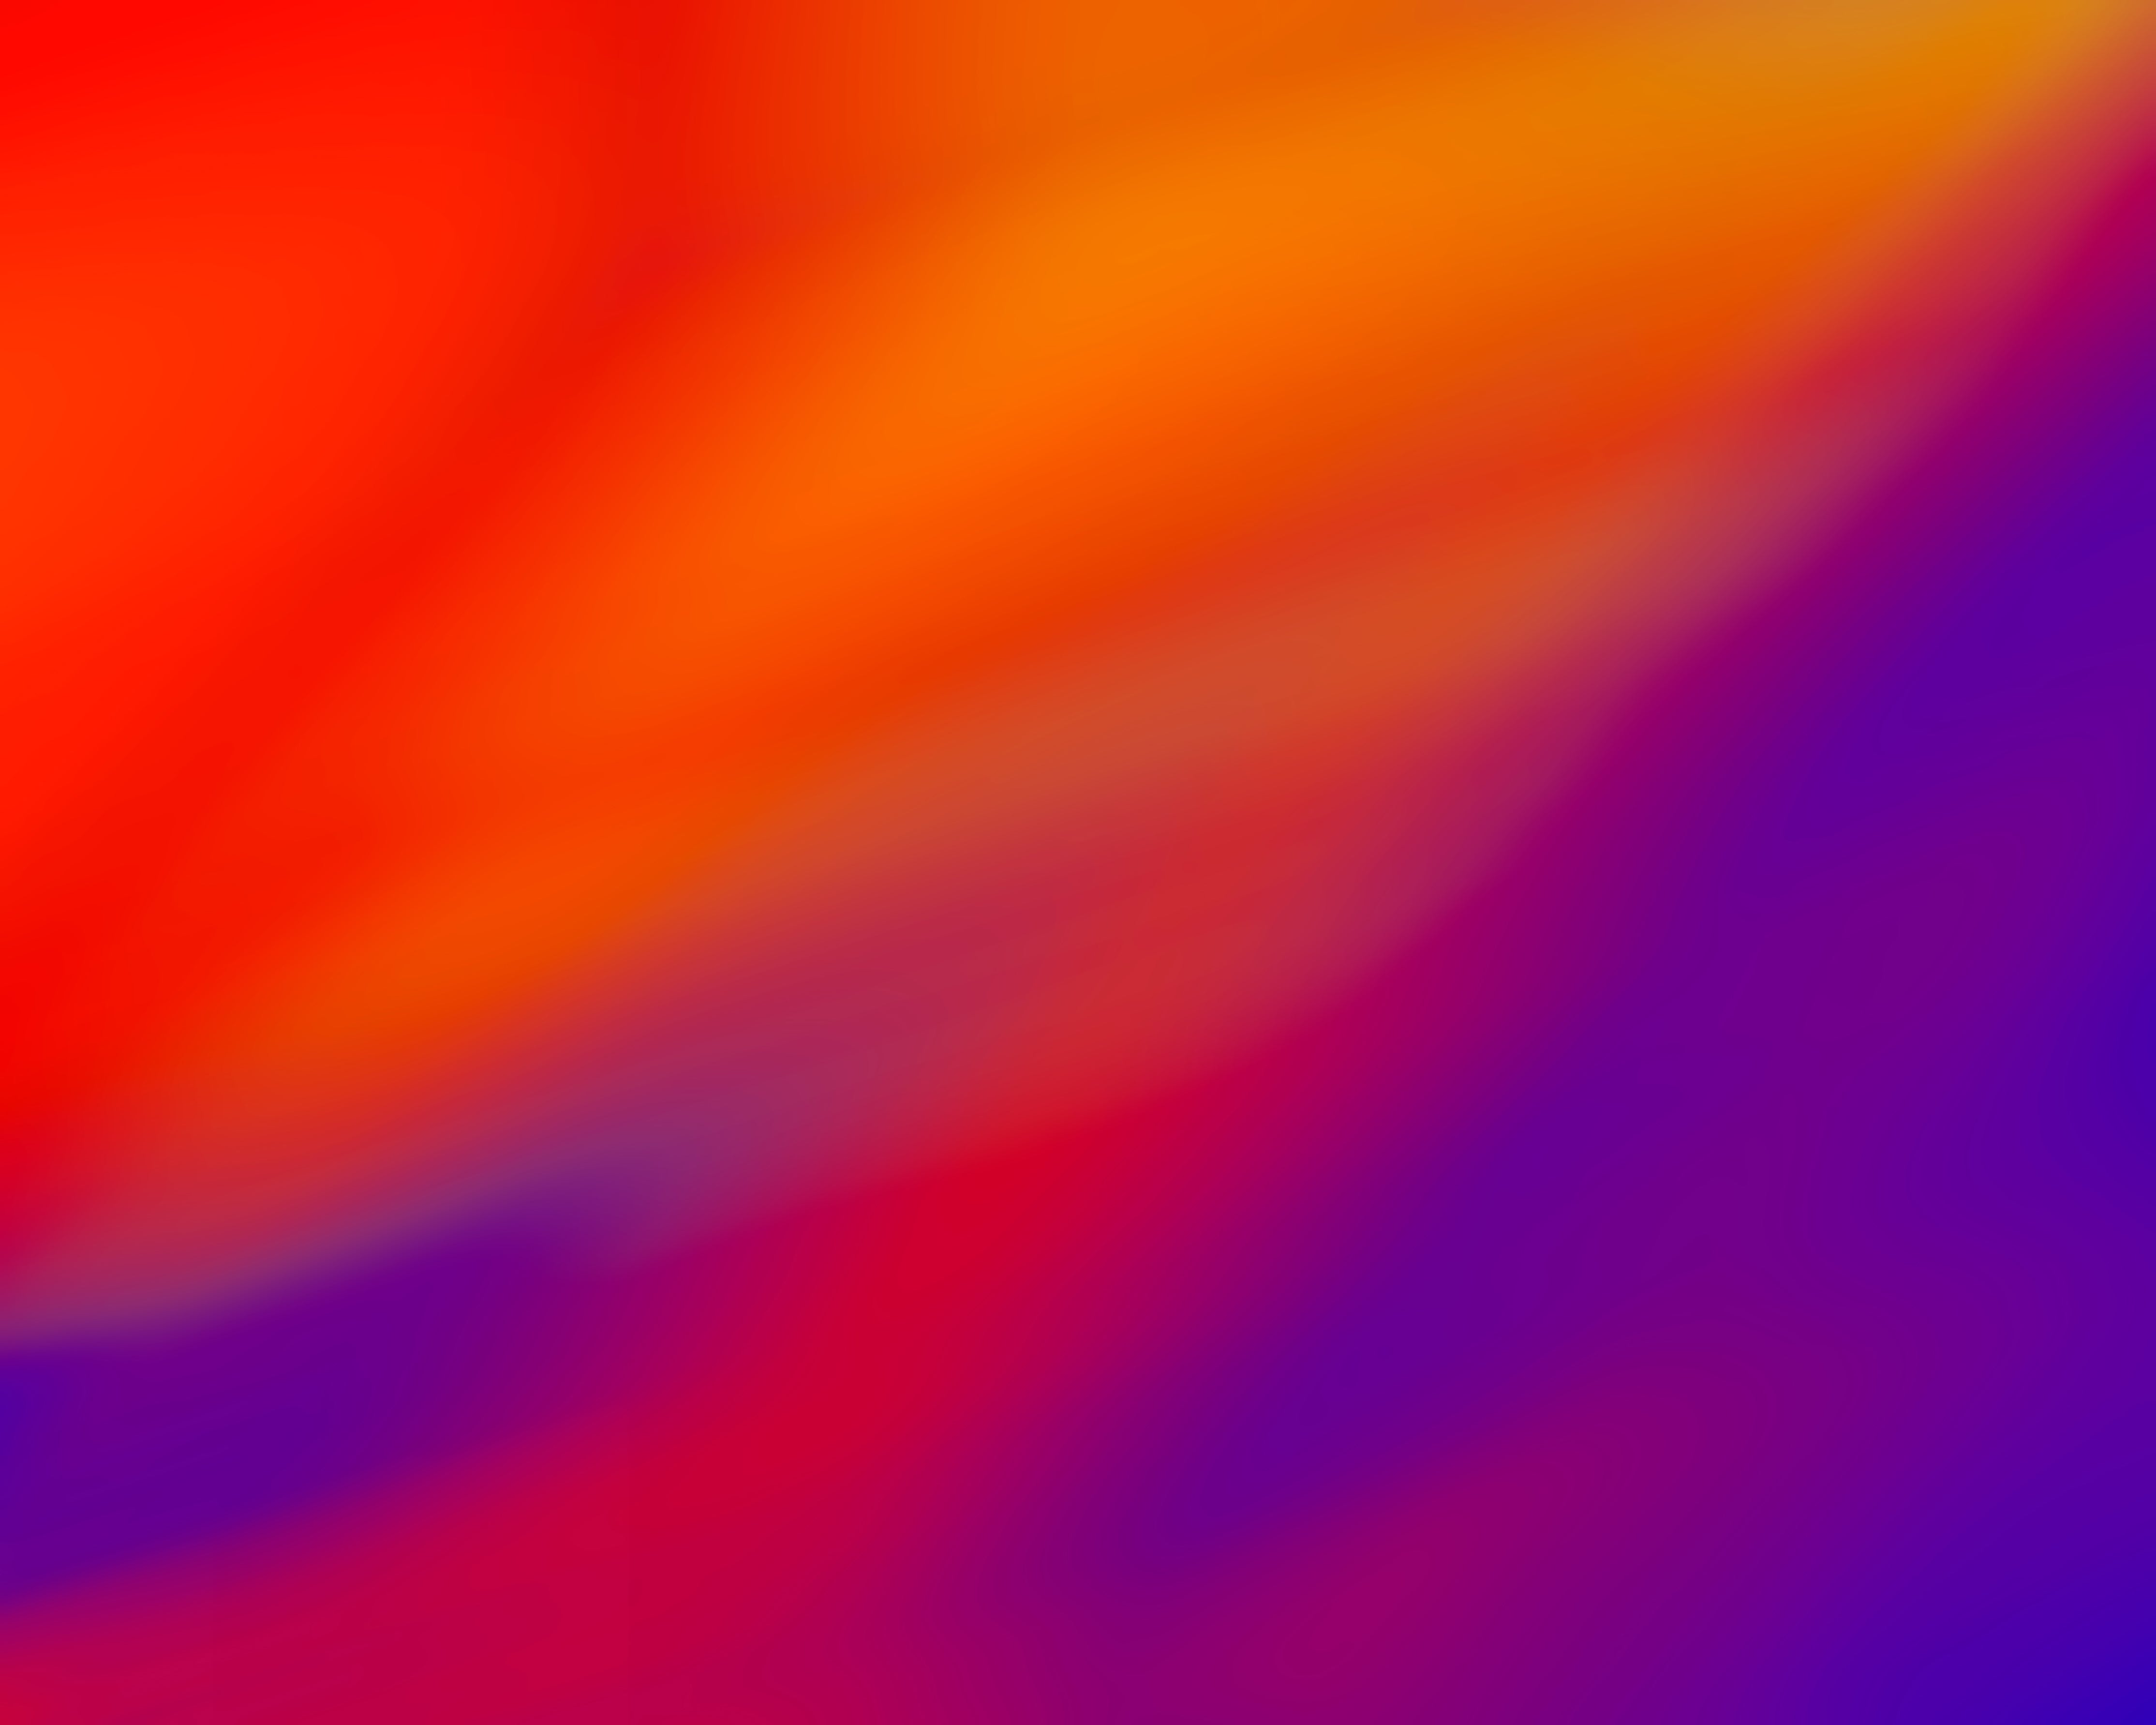 photo of abstract orange, yellow and purple